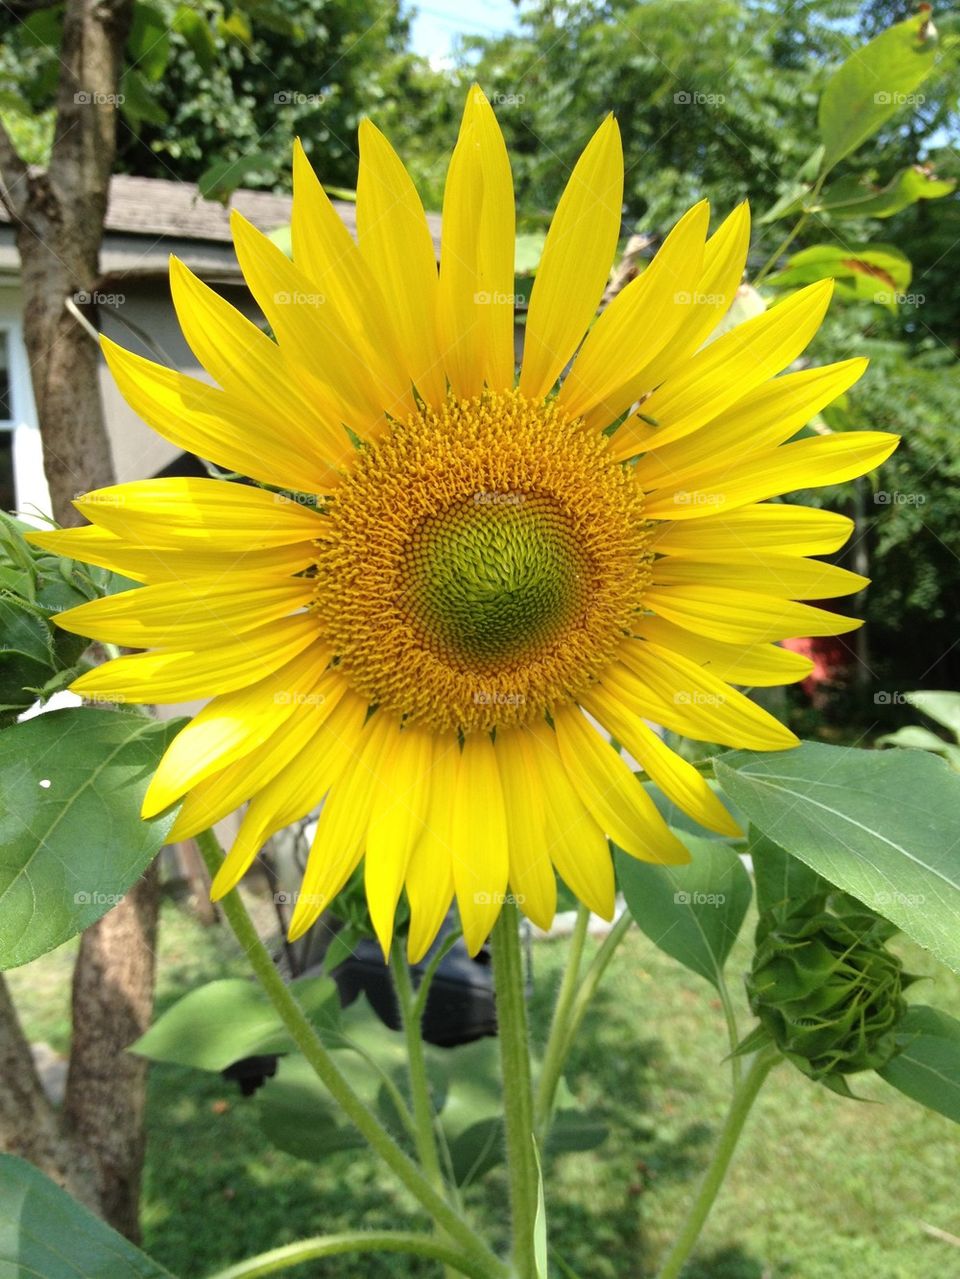 Bird Seed Volunteer . One and only sunflower sprouted.  A hearty plant that required no help from human cultivation.